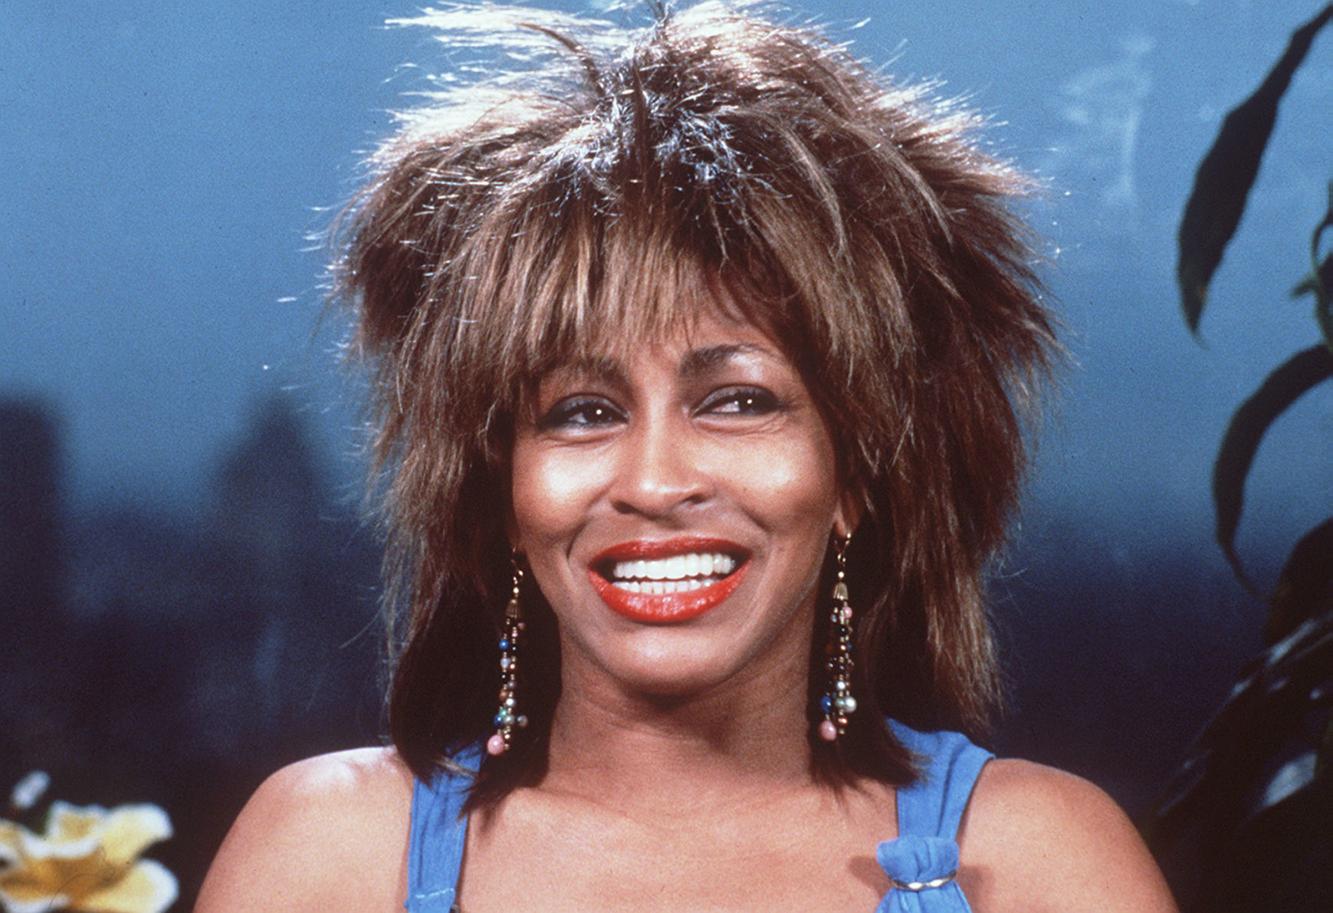 Photos: Tina Turner turns 80 today. A look at her life, in images.